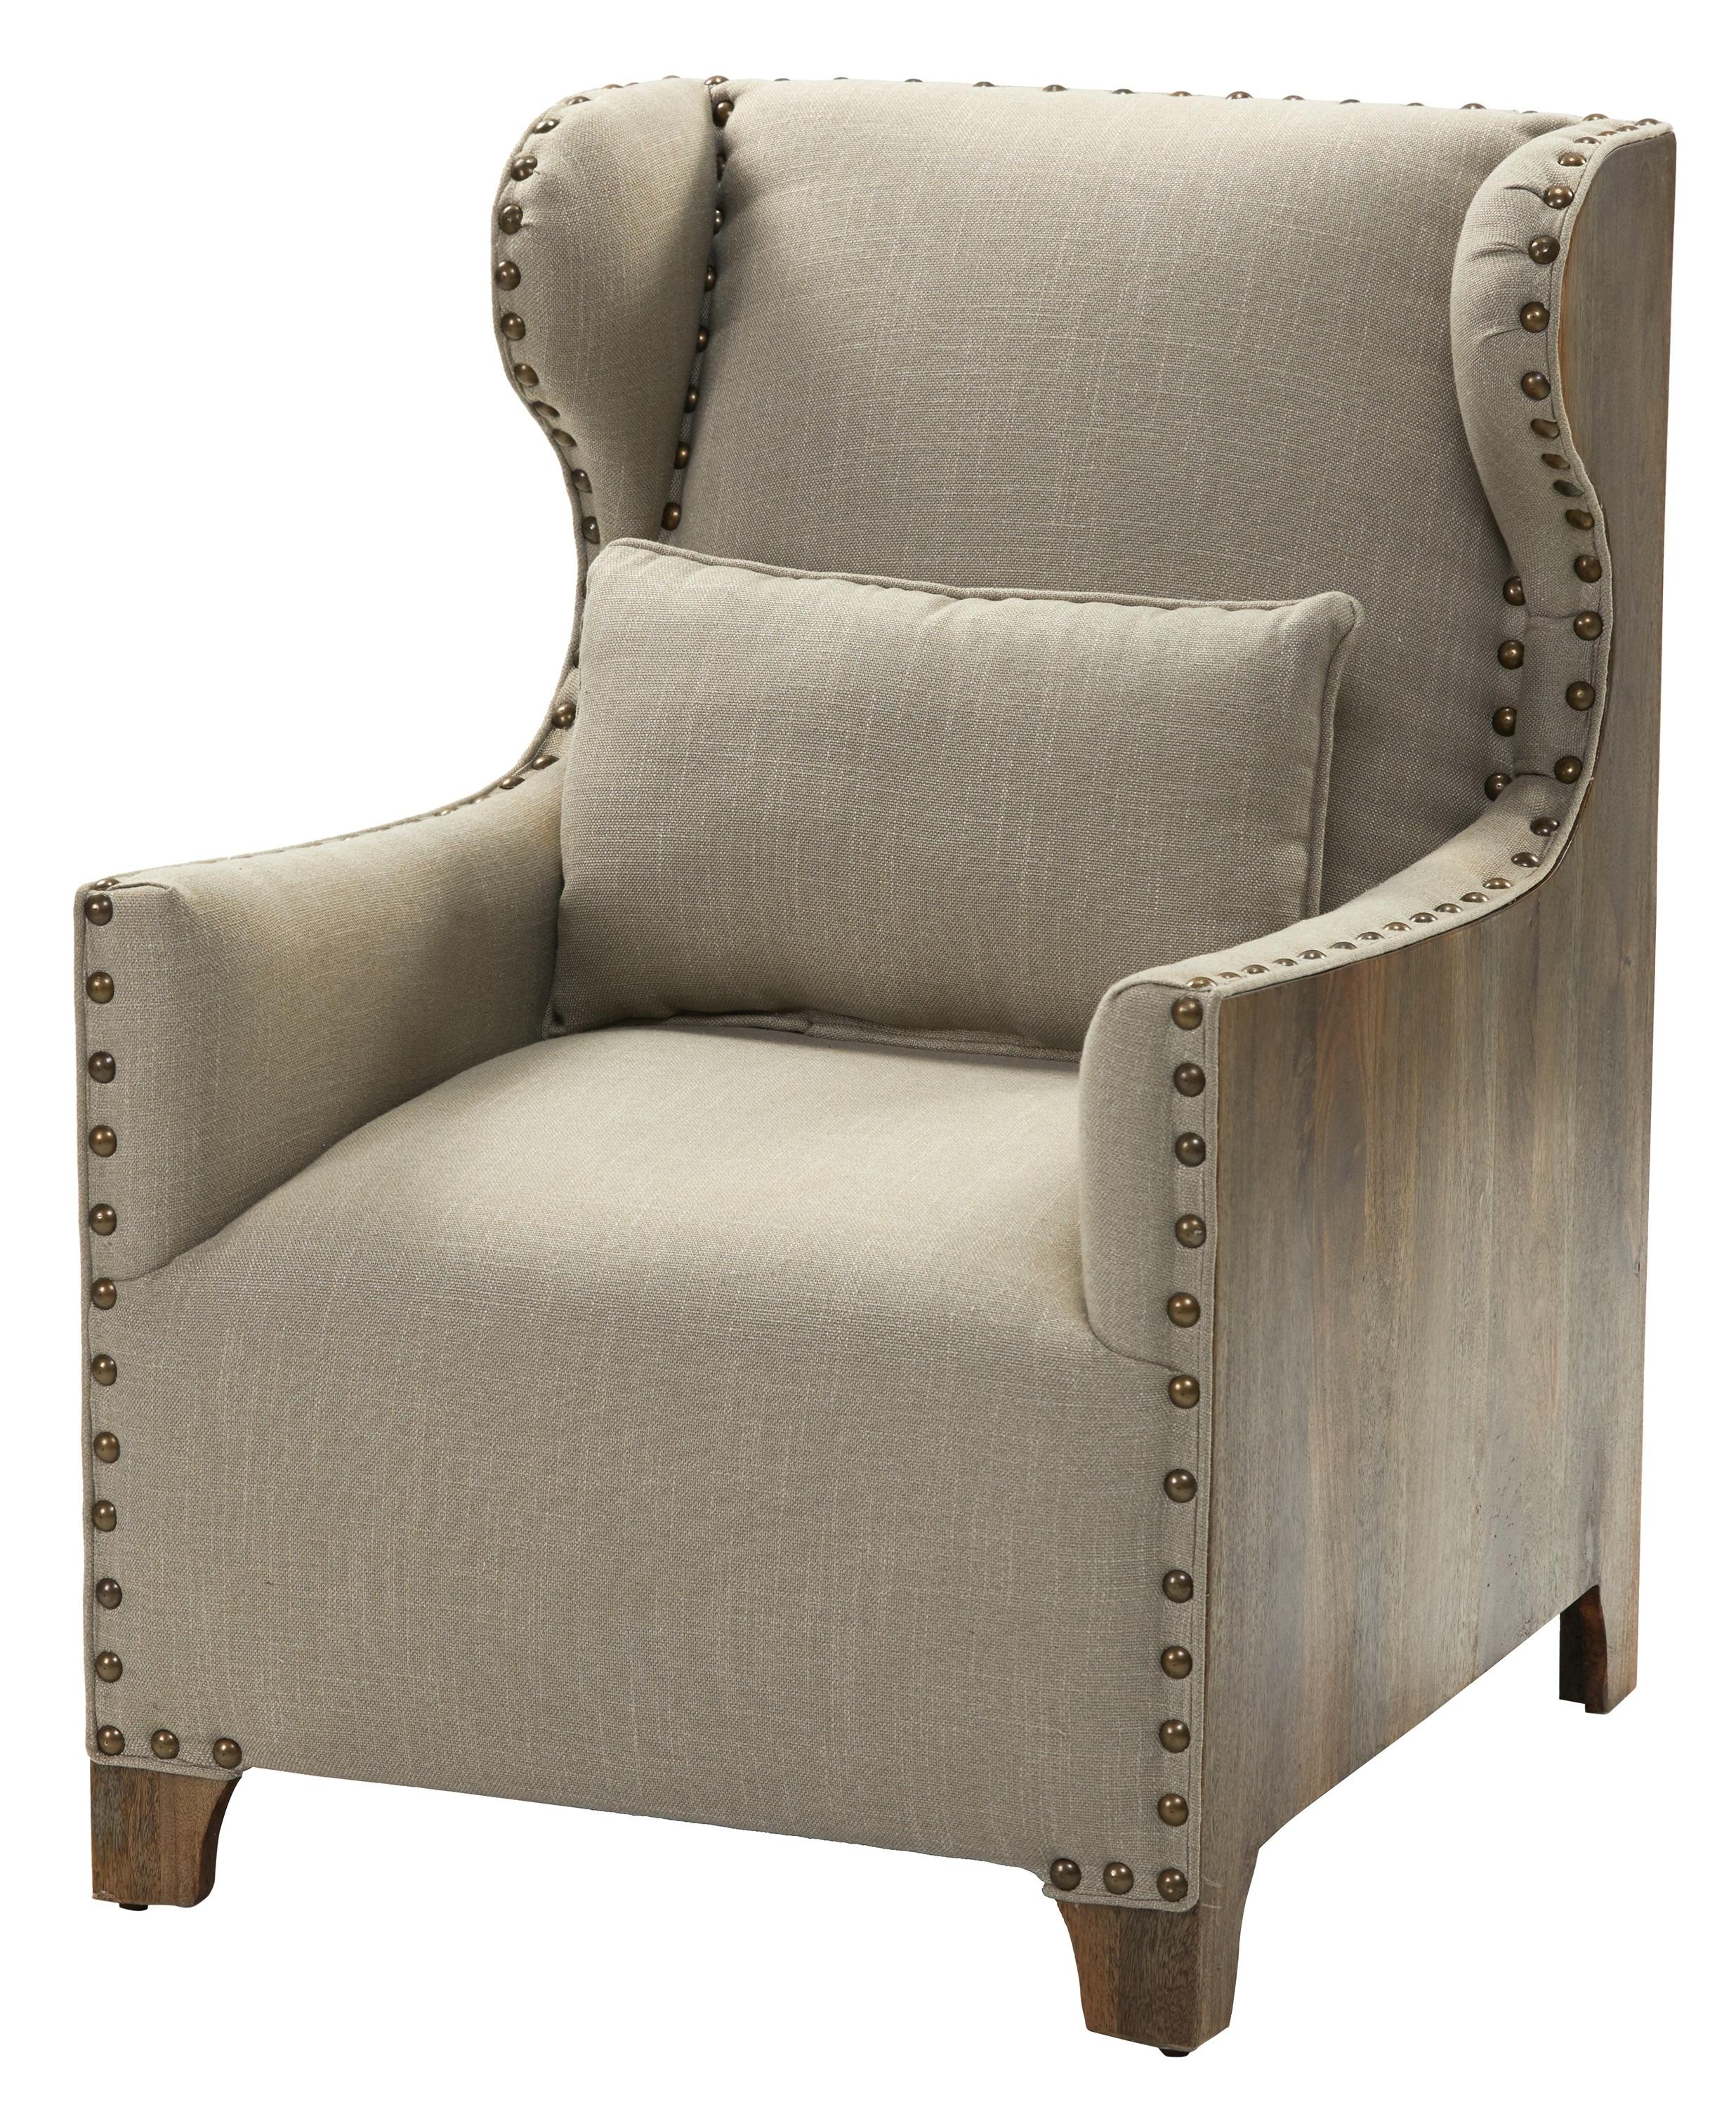 Transitional Chair CAC-5277 Chadwick CAC-5277 in Oak, Beige Polyester